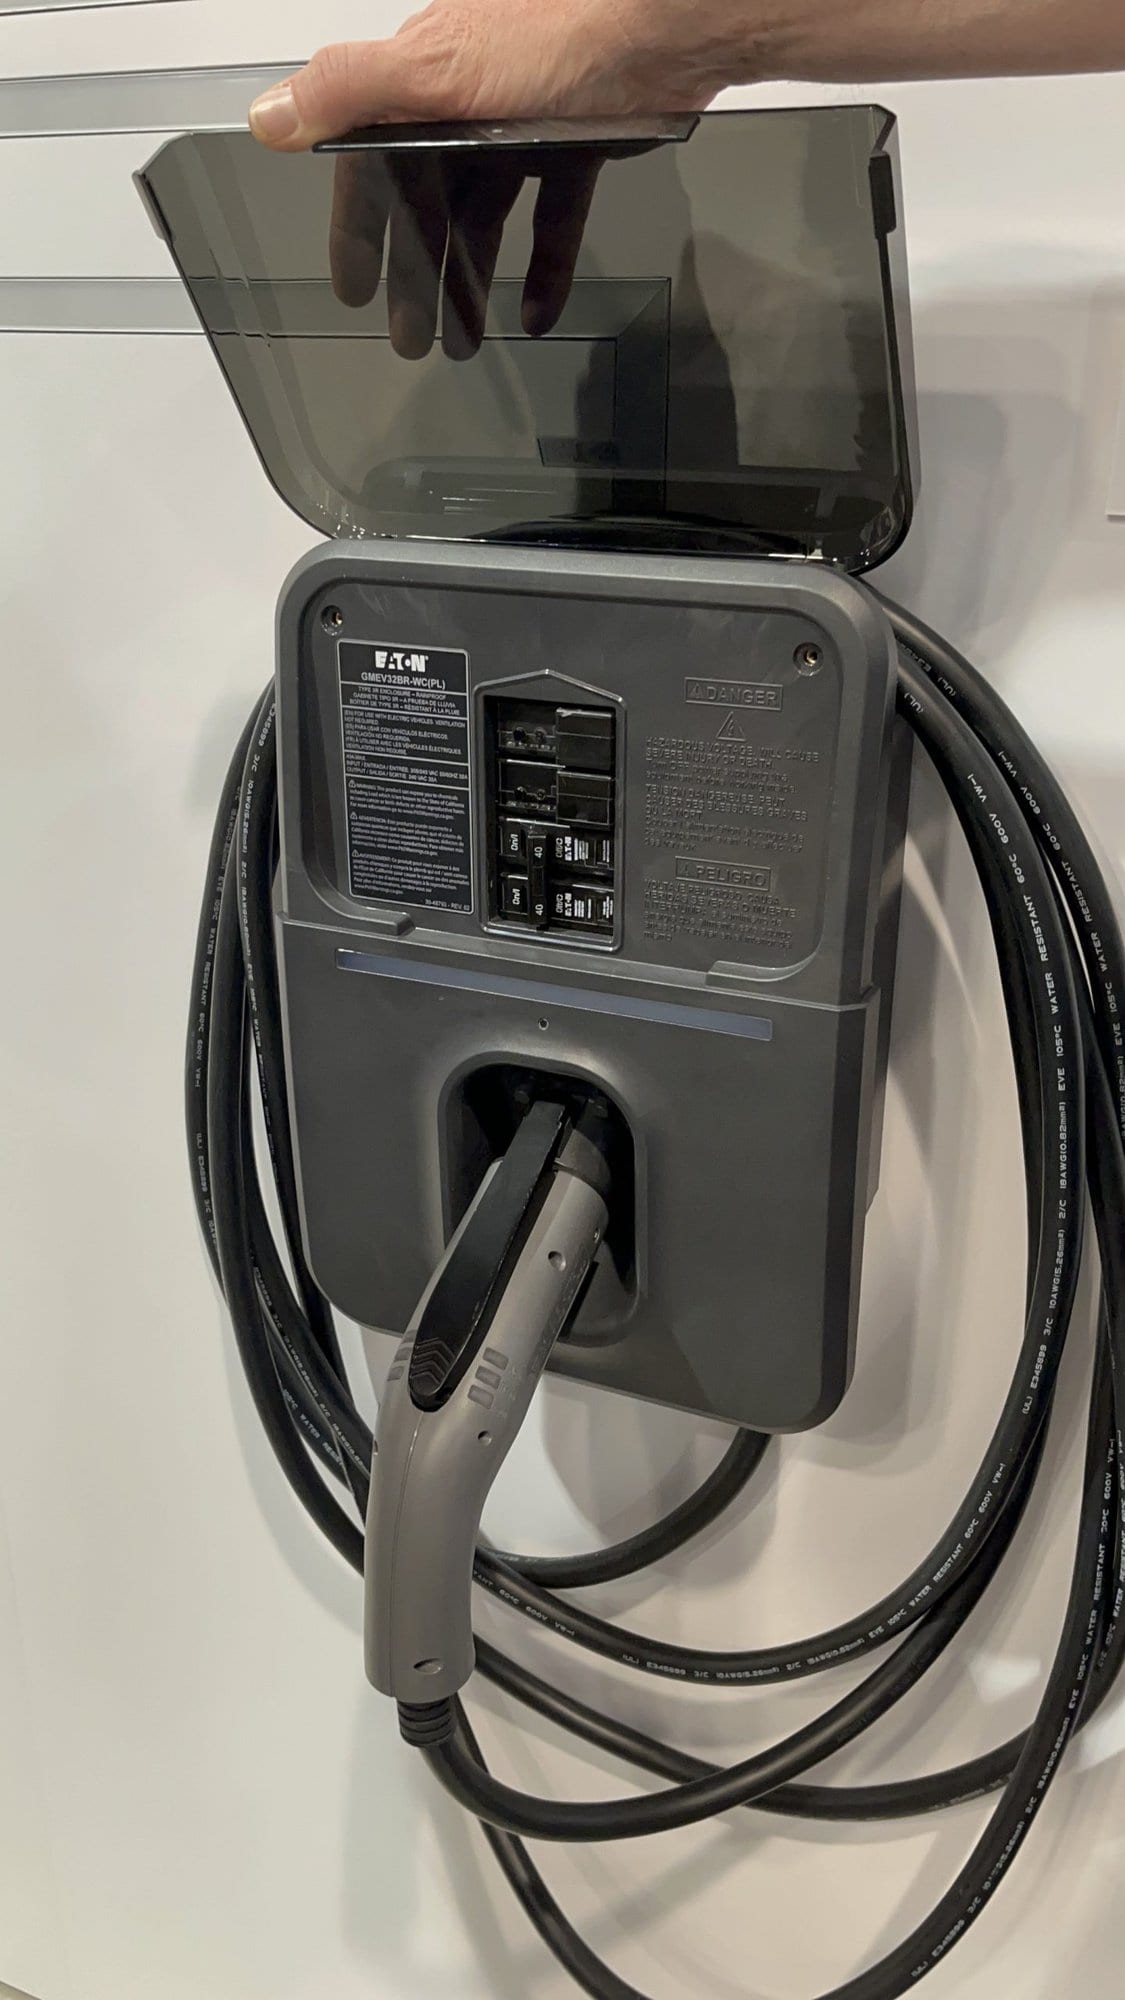 The practical differences between level 1 and level 2 EV chargers